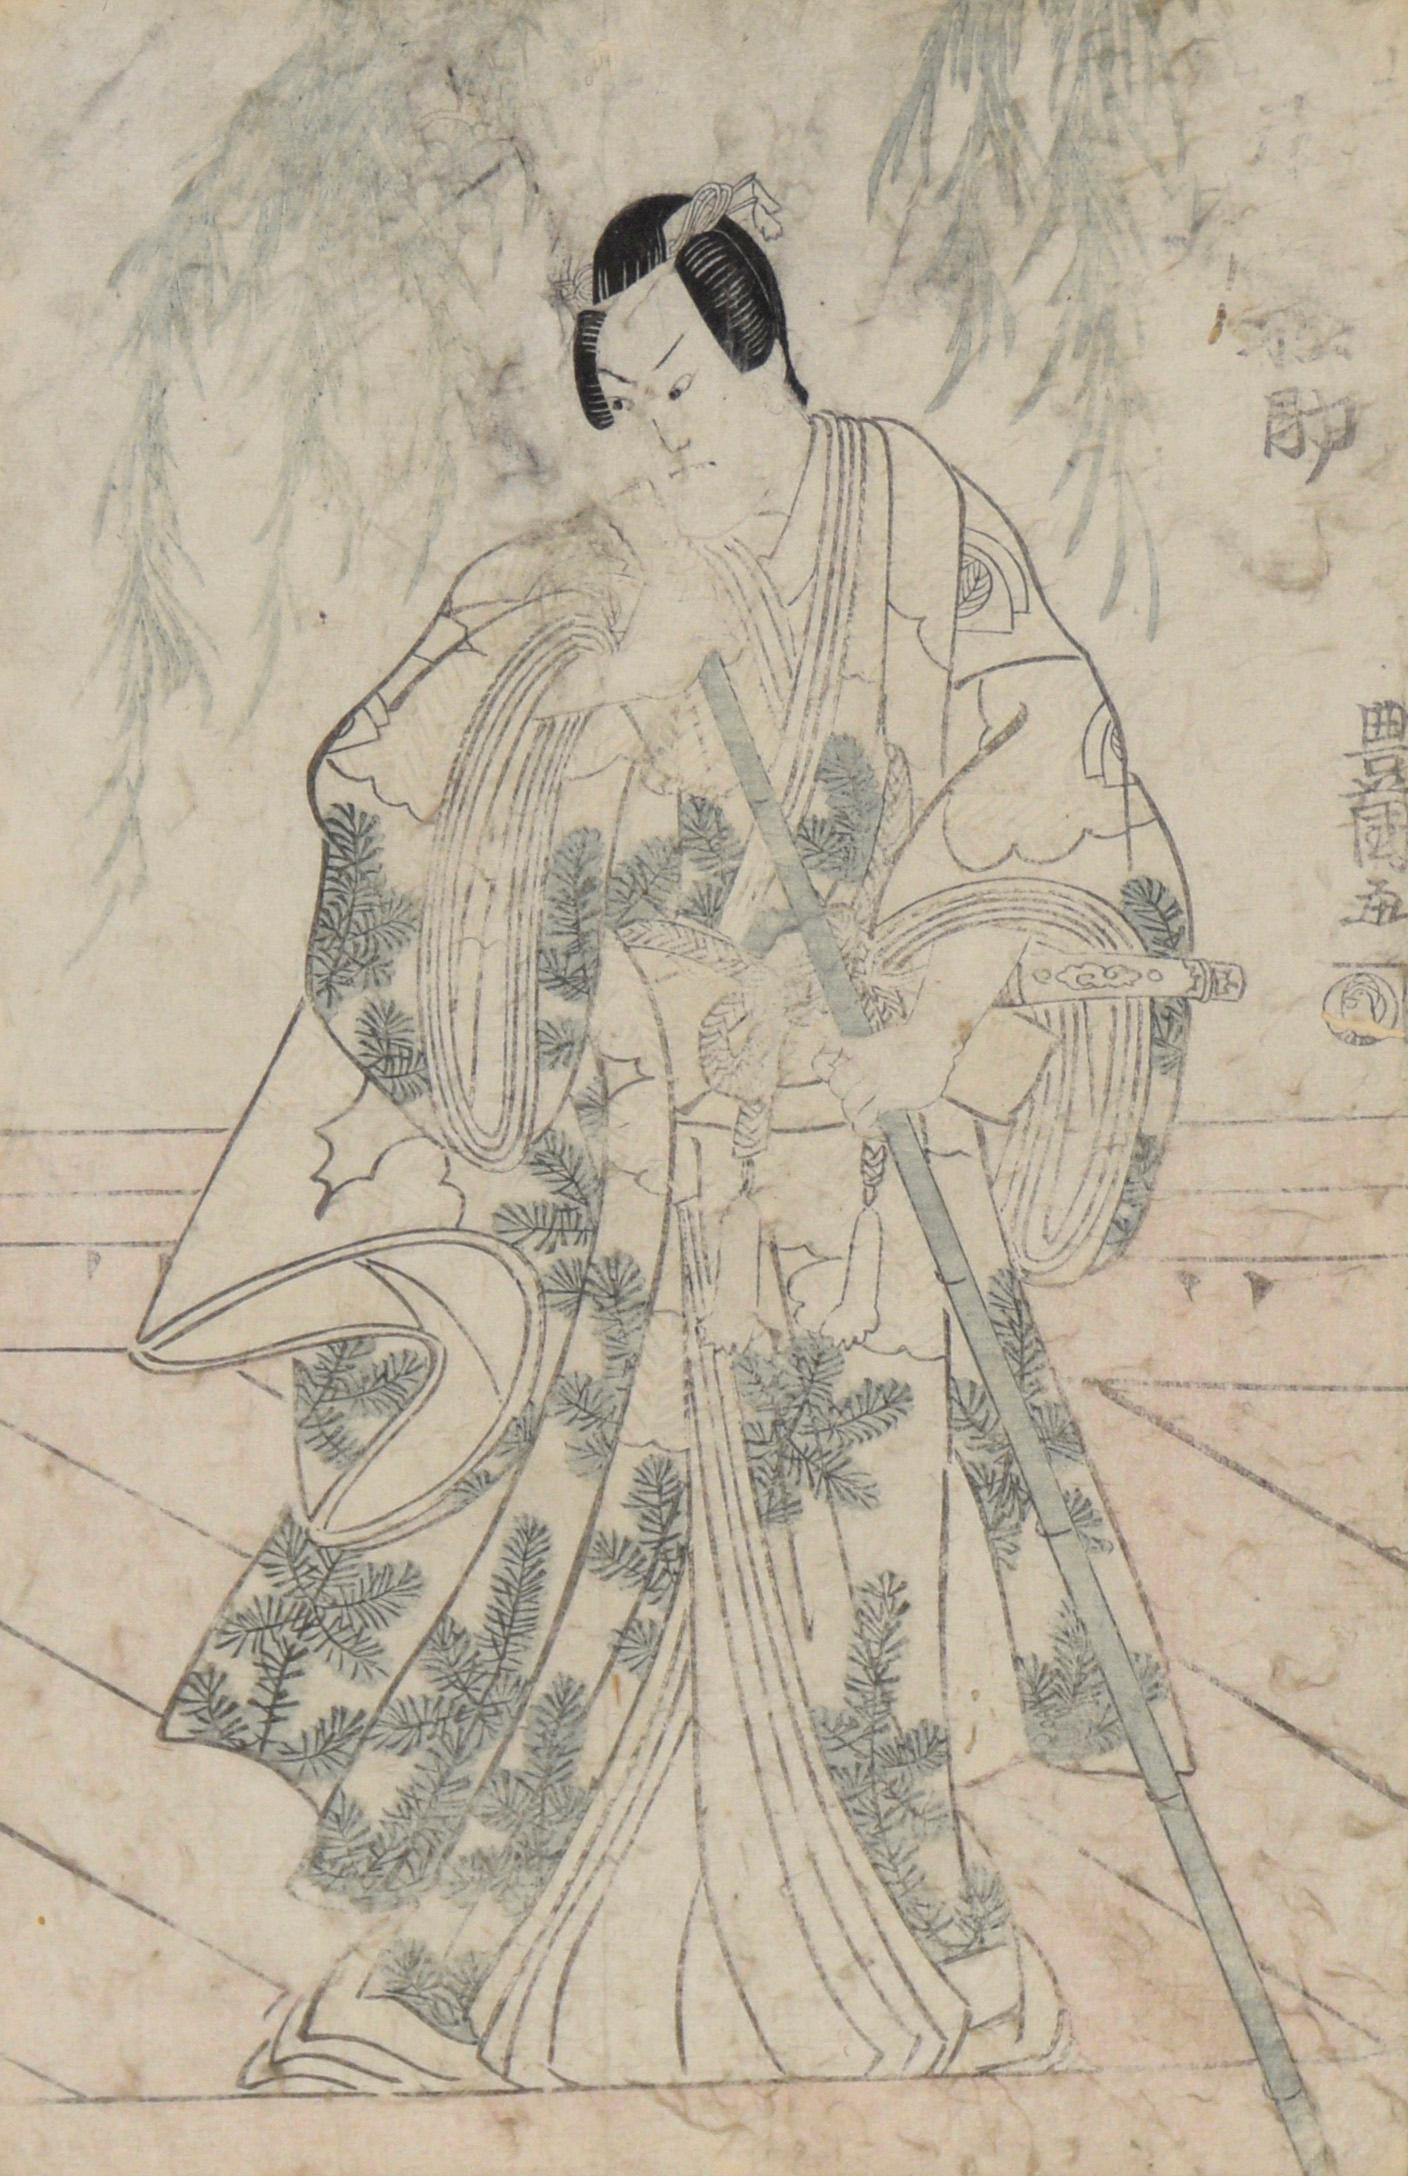 Kabuki Actor with Pine-Patterned Robe - Japanese Woodblock Print

Finely detailed woodblock by Utagawa Toyokuni (Japanese, 1769-1825). A kabuki actor is standing on a wooden deck, wearing a robe with a pine-needle pattern. He is holding a sword and